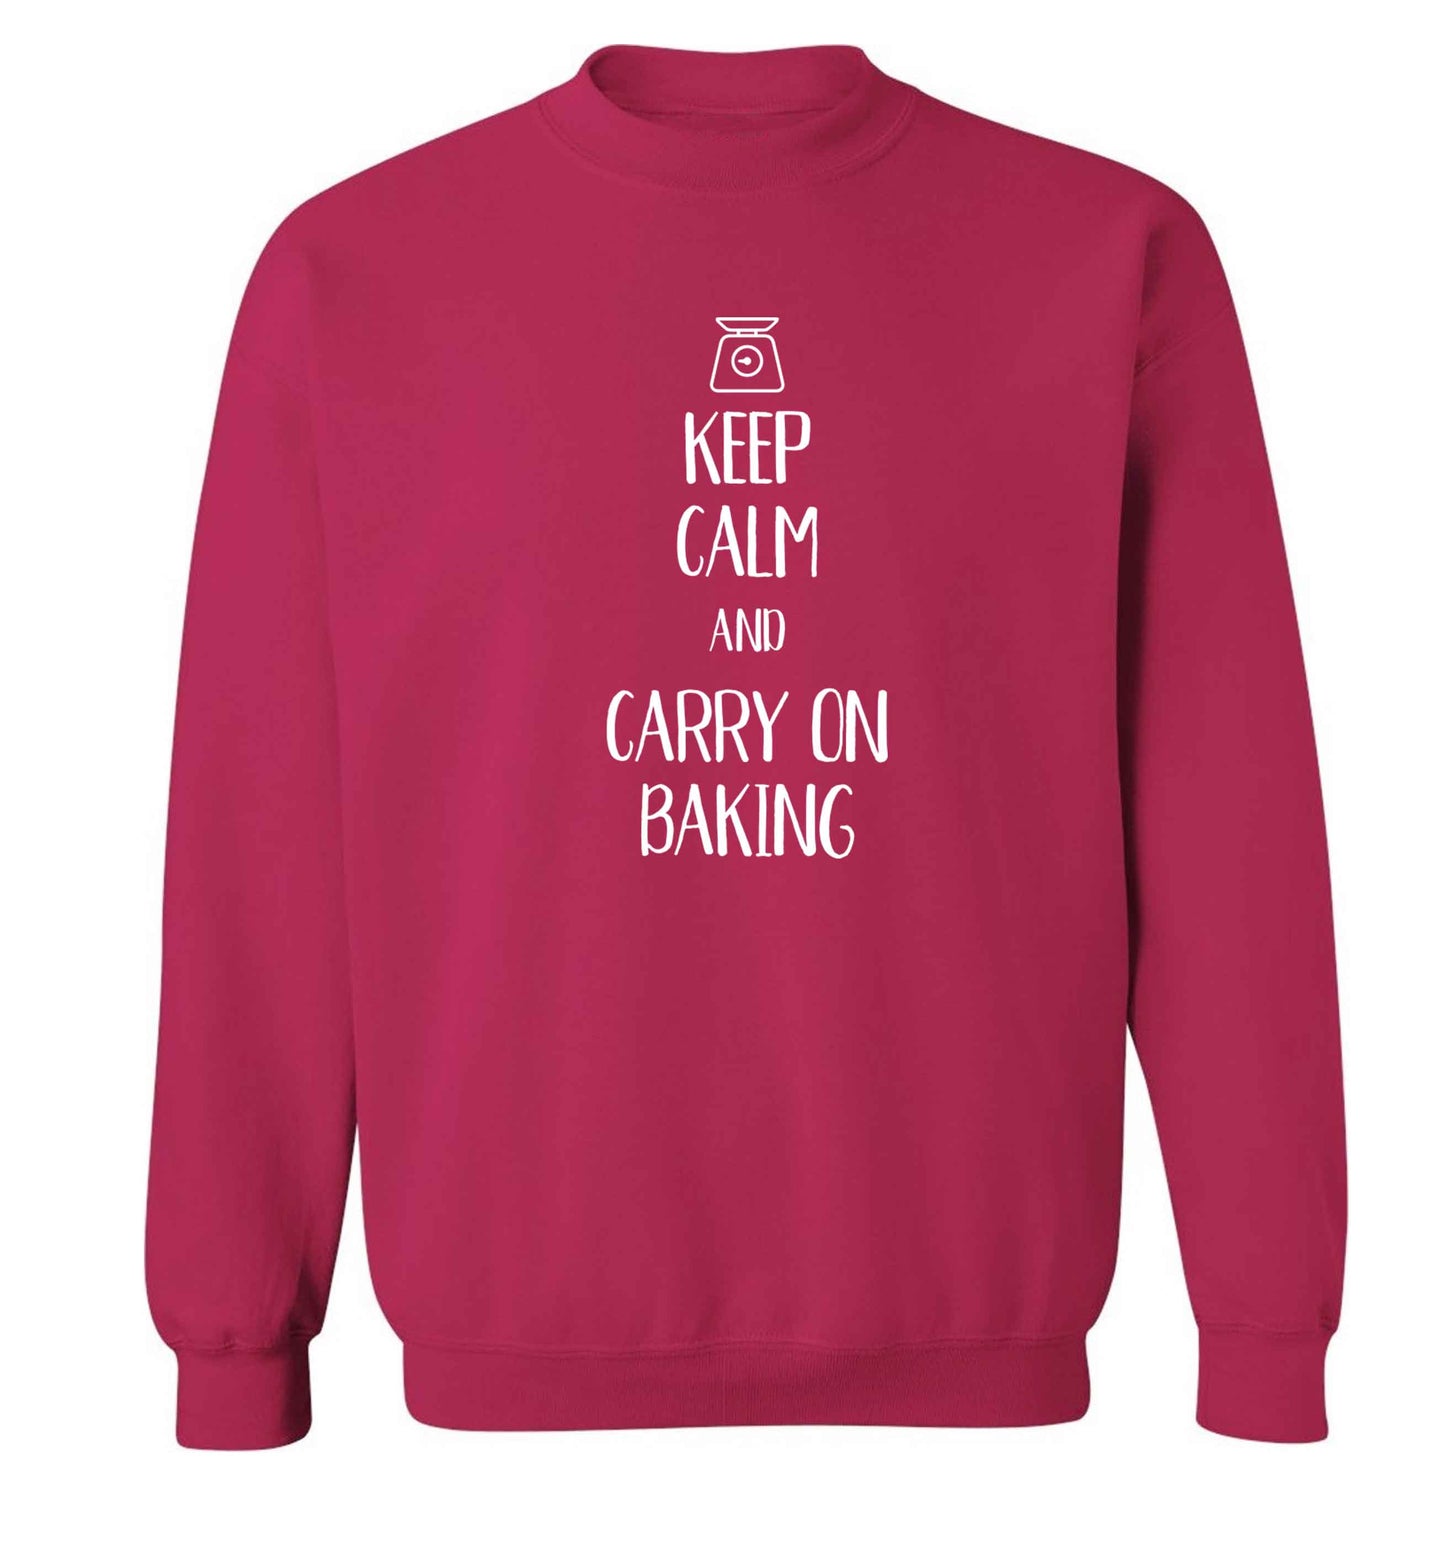 Keep calm and carry on baking Adult's unisex pink Sweater 2XL